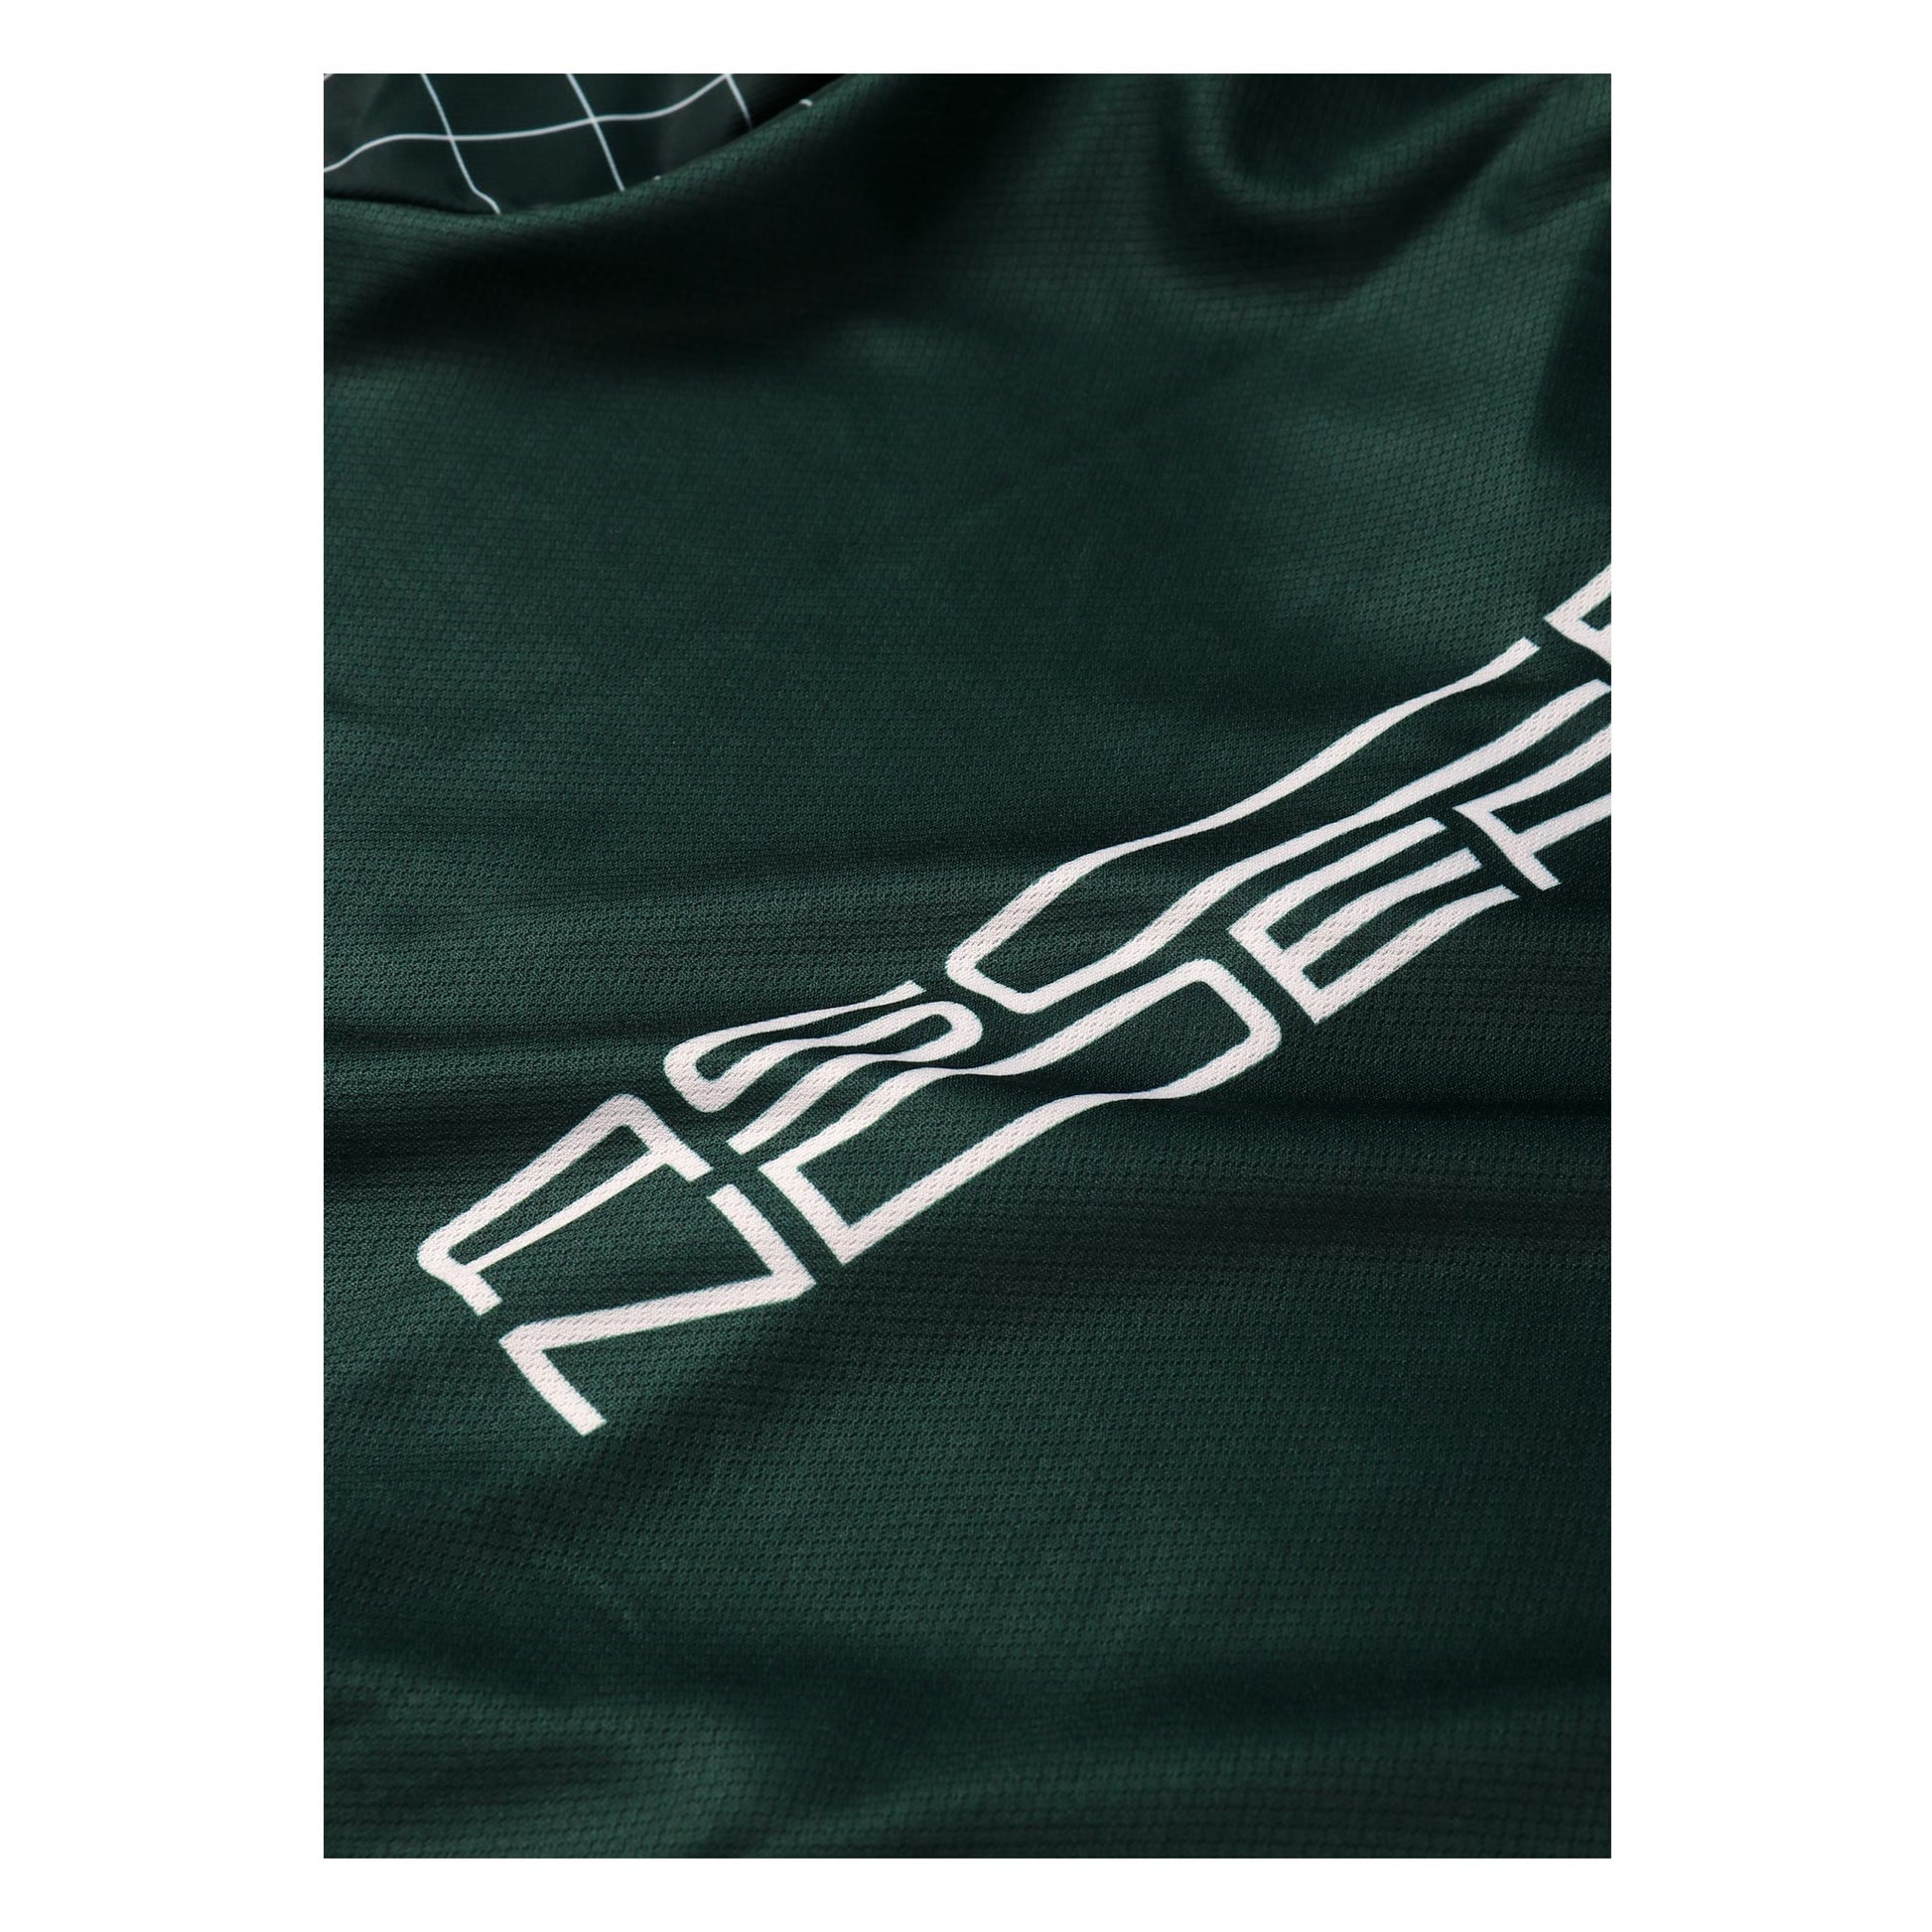 Supernova Sustainable Short Sleeves Cycling Jersey Green from Ascender Cycling Club Zürich Switzerland Back Design View